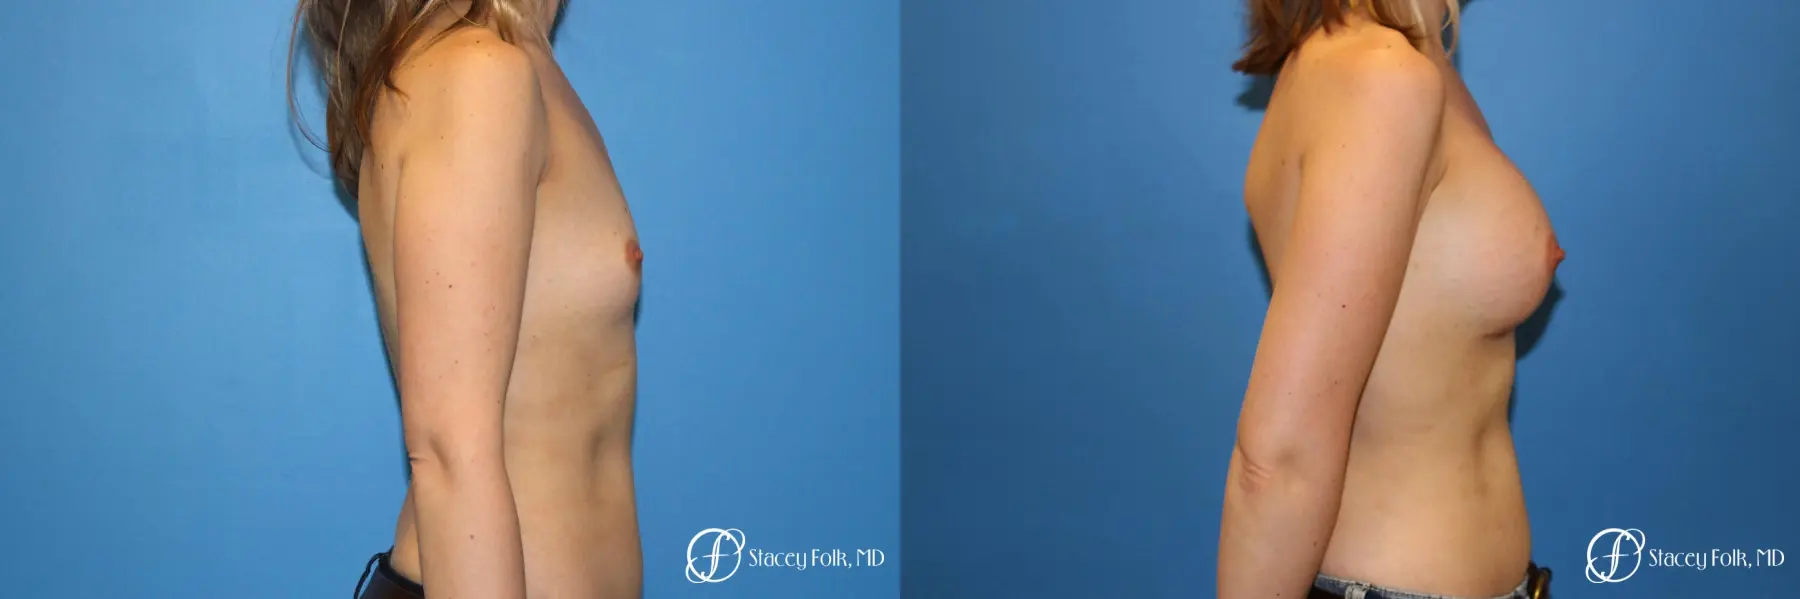 Denver Breast augmentation 7110 - Before and After 3